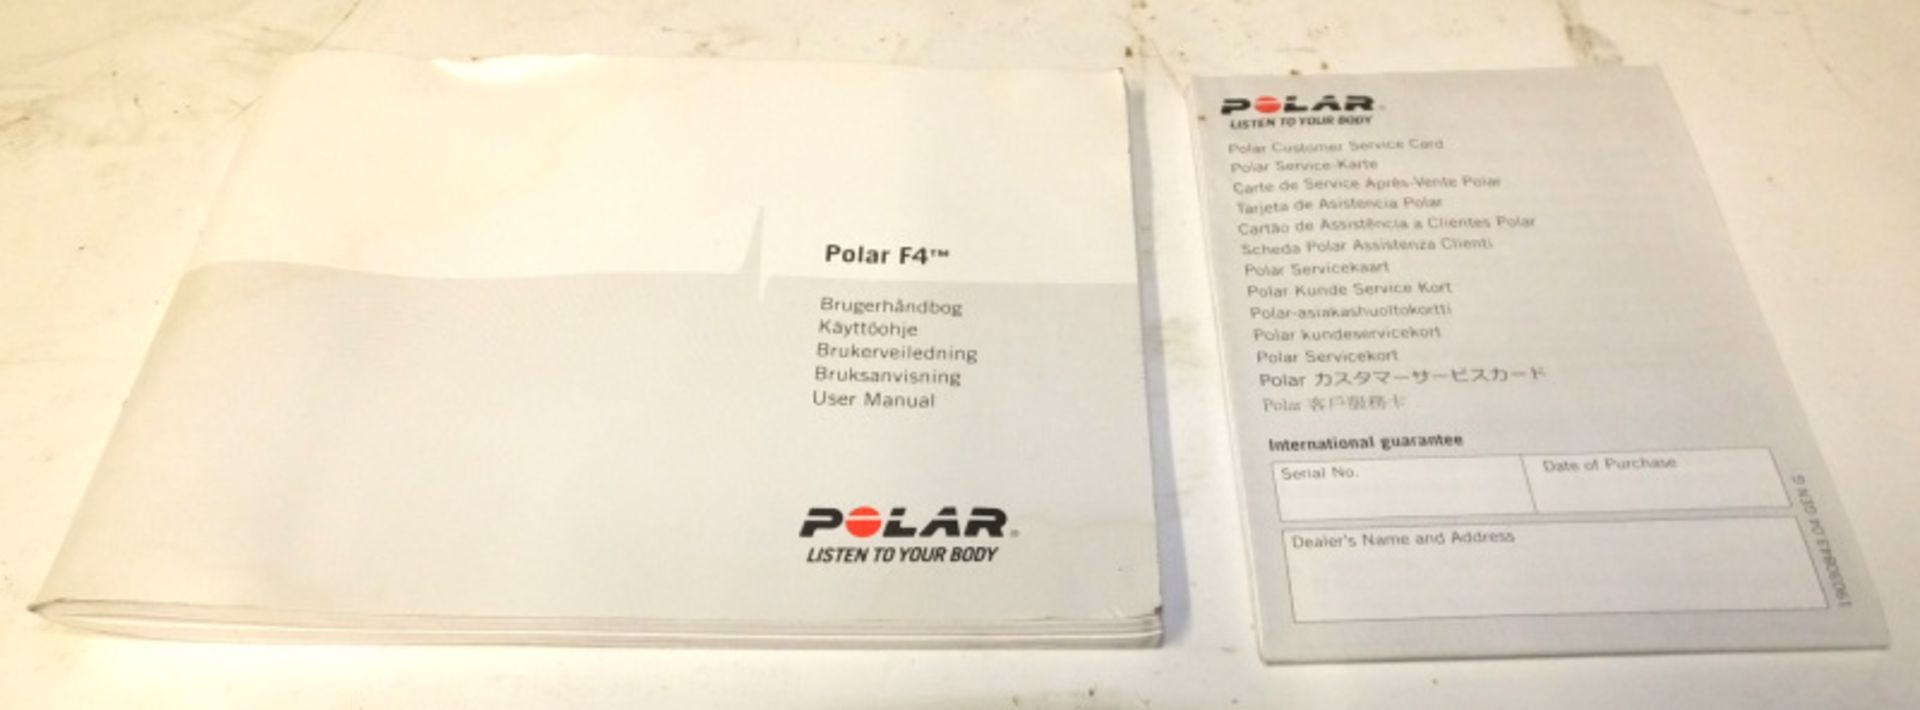 2x Polar F4 Fitness Heart Rate Monitors with Polar Heart Rate Chest Sensors - Image 3 of 5